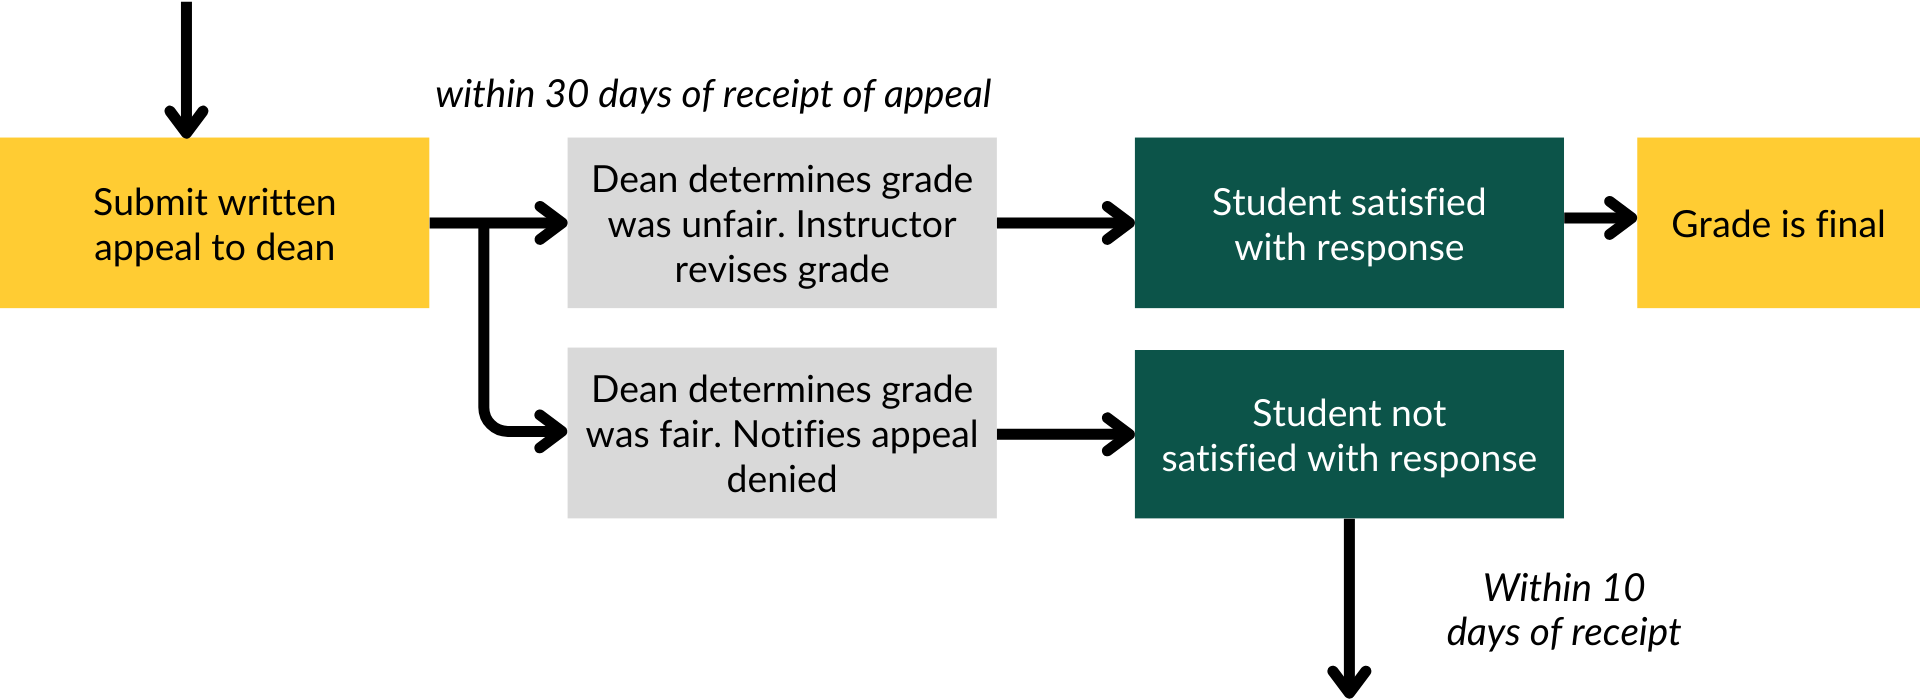 Grade appeal process for dean